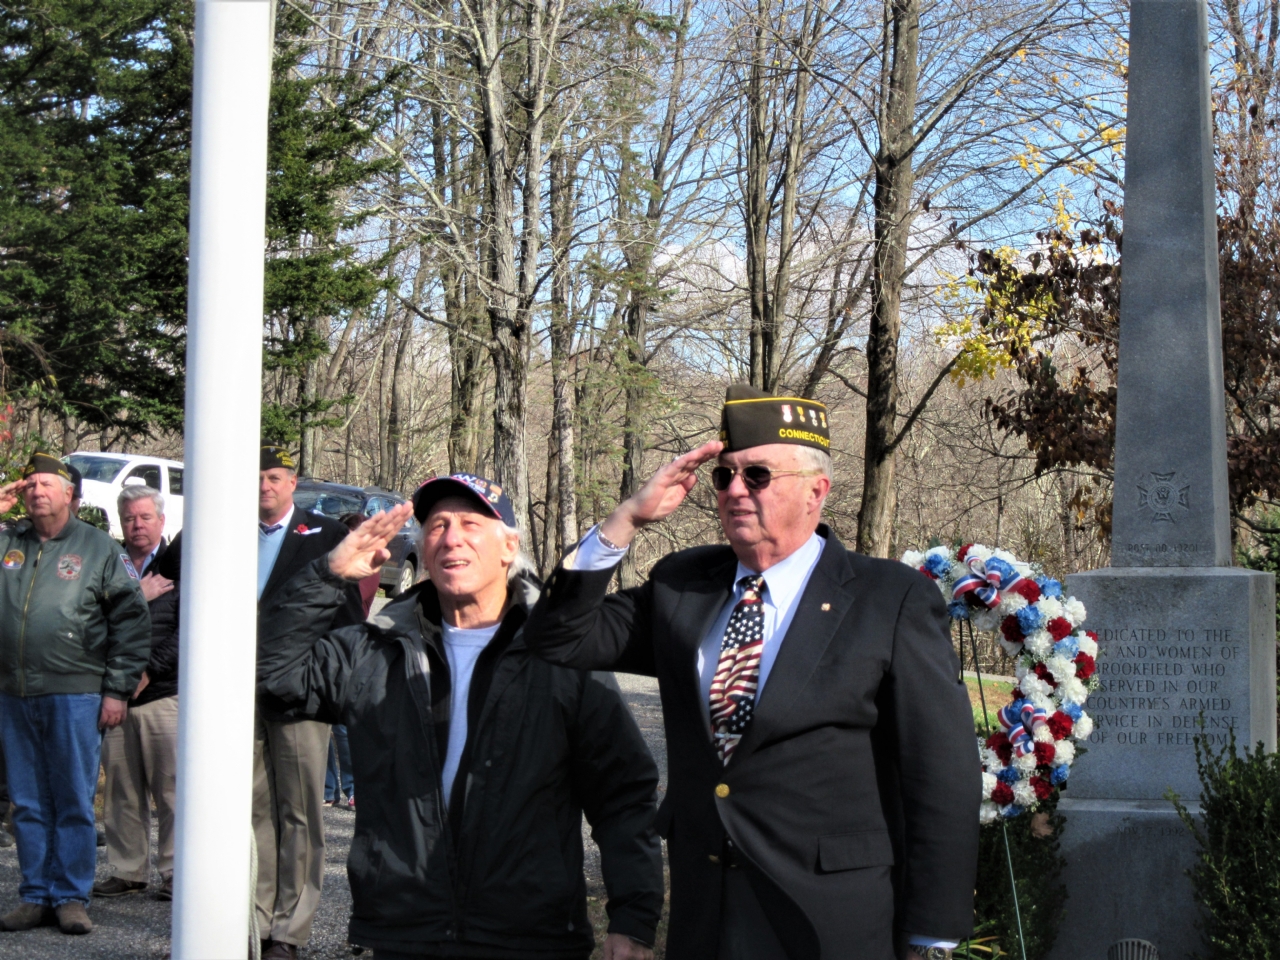 Jack Tyransky and Sandy Sanderson salute the American Flag after raising it.